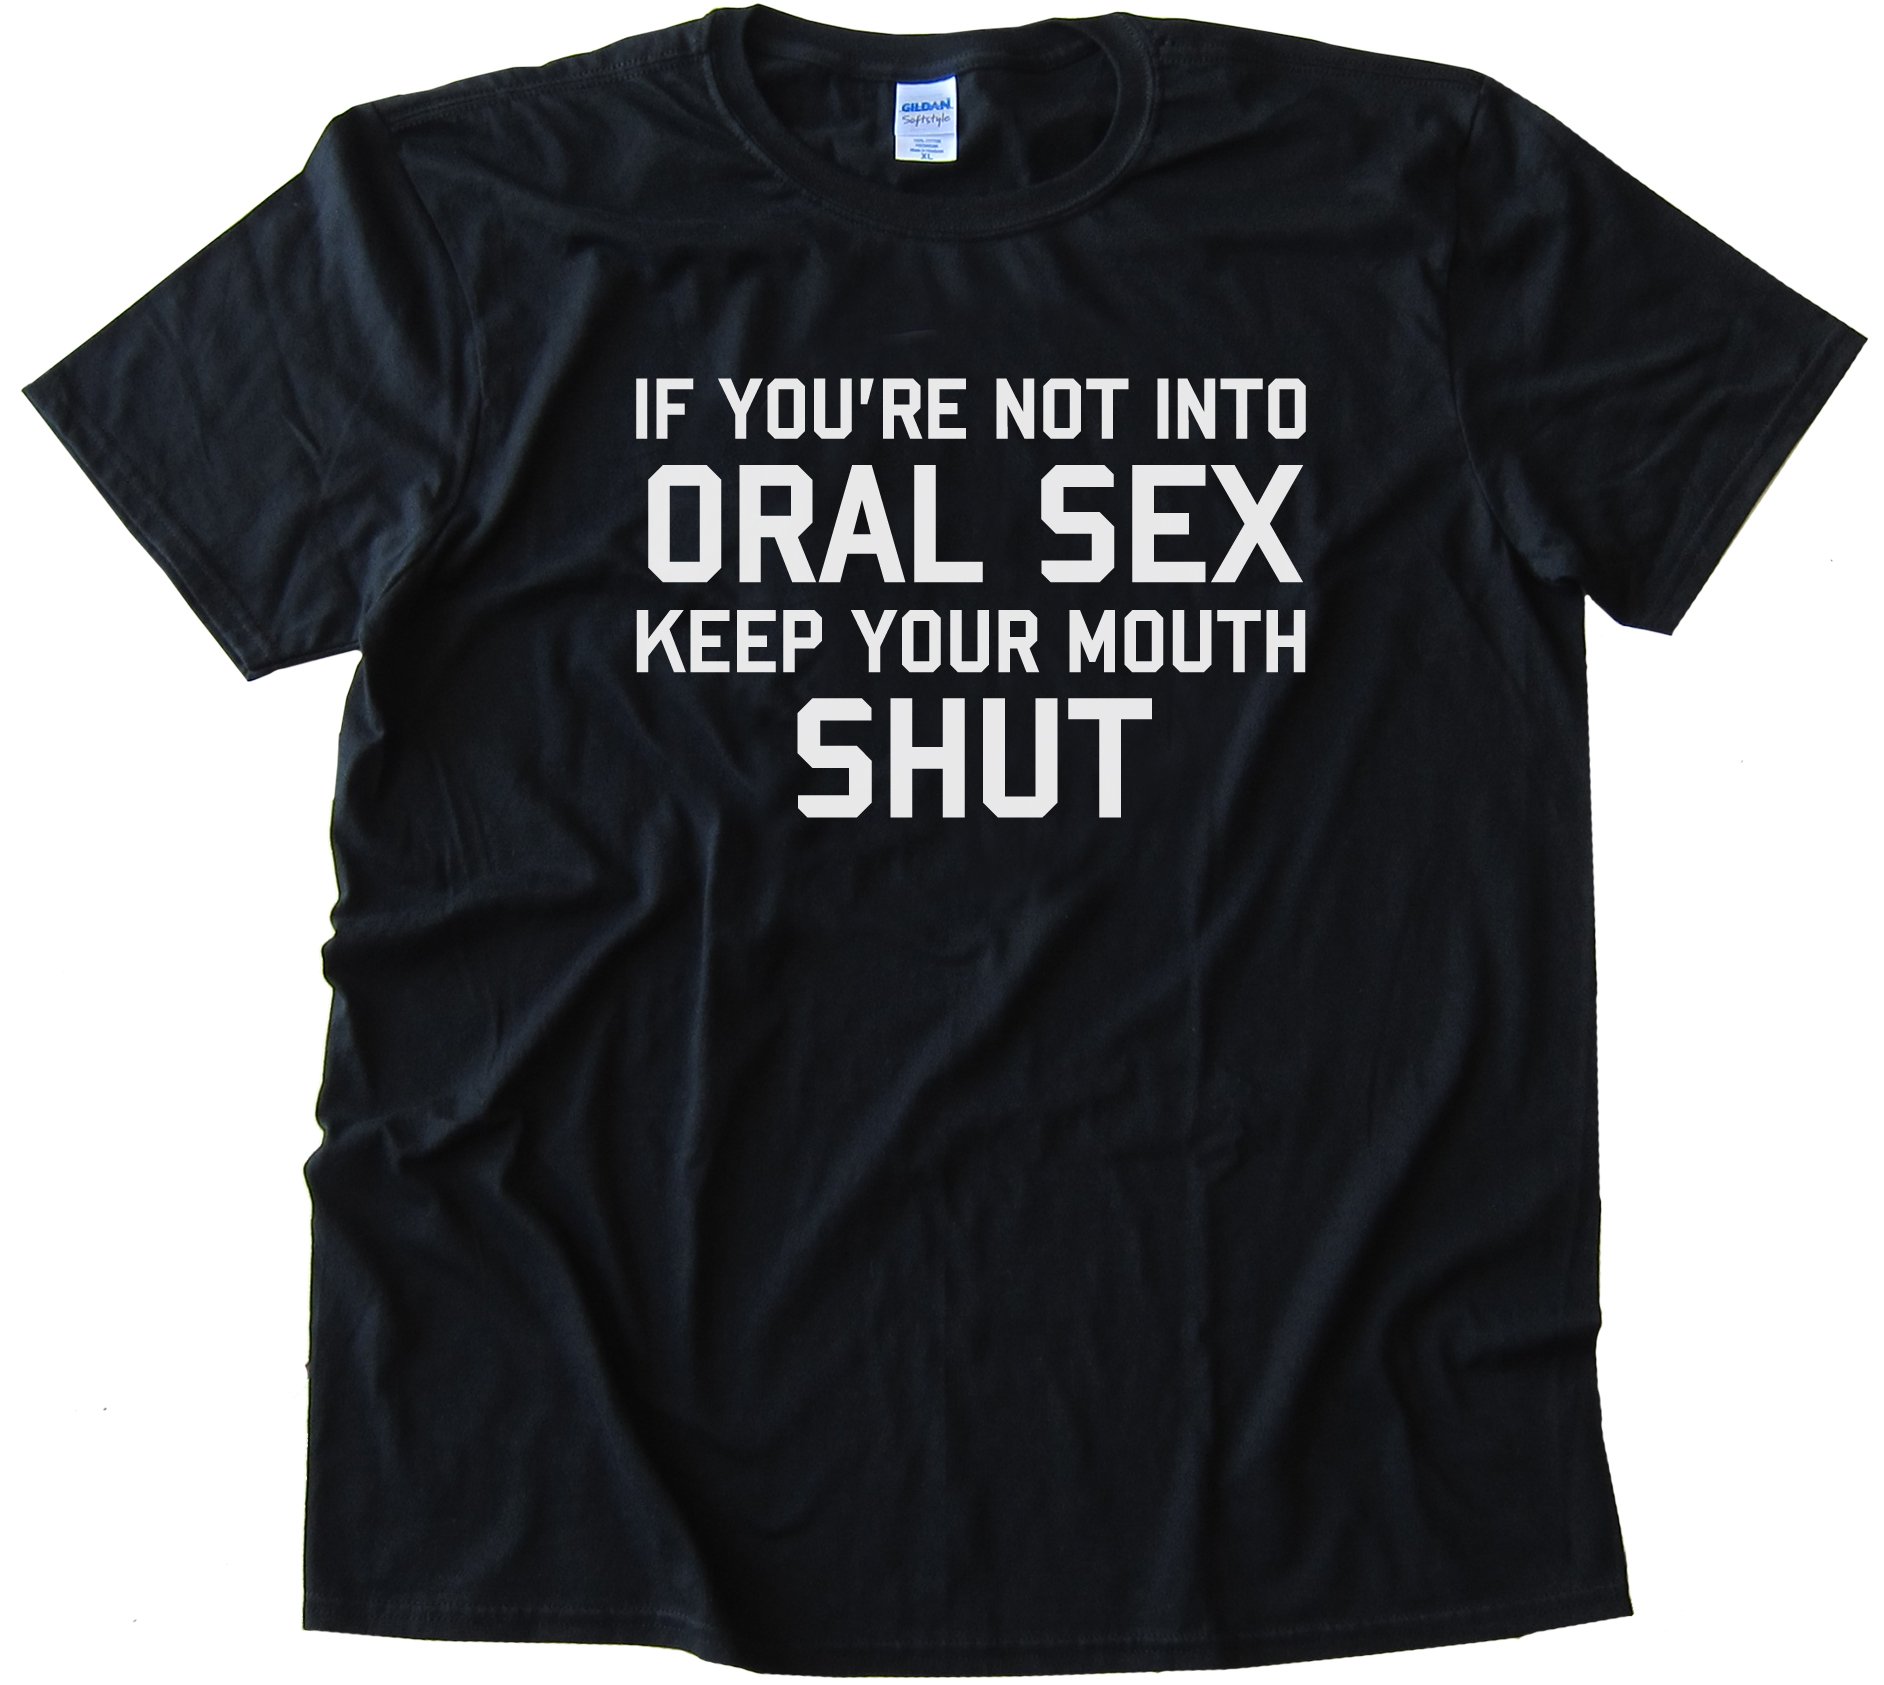 If You'Re Not Into Oral Sex Keep Your Mouth Shut Tee Shirt.